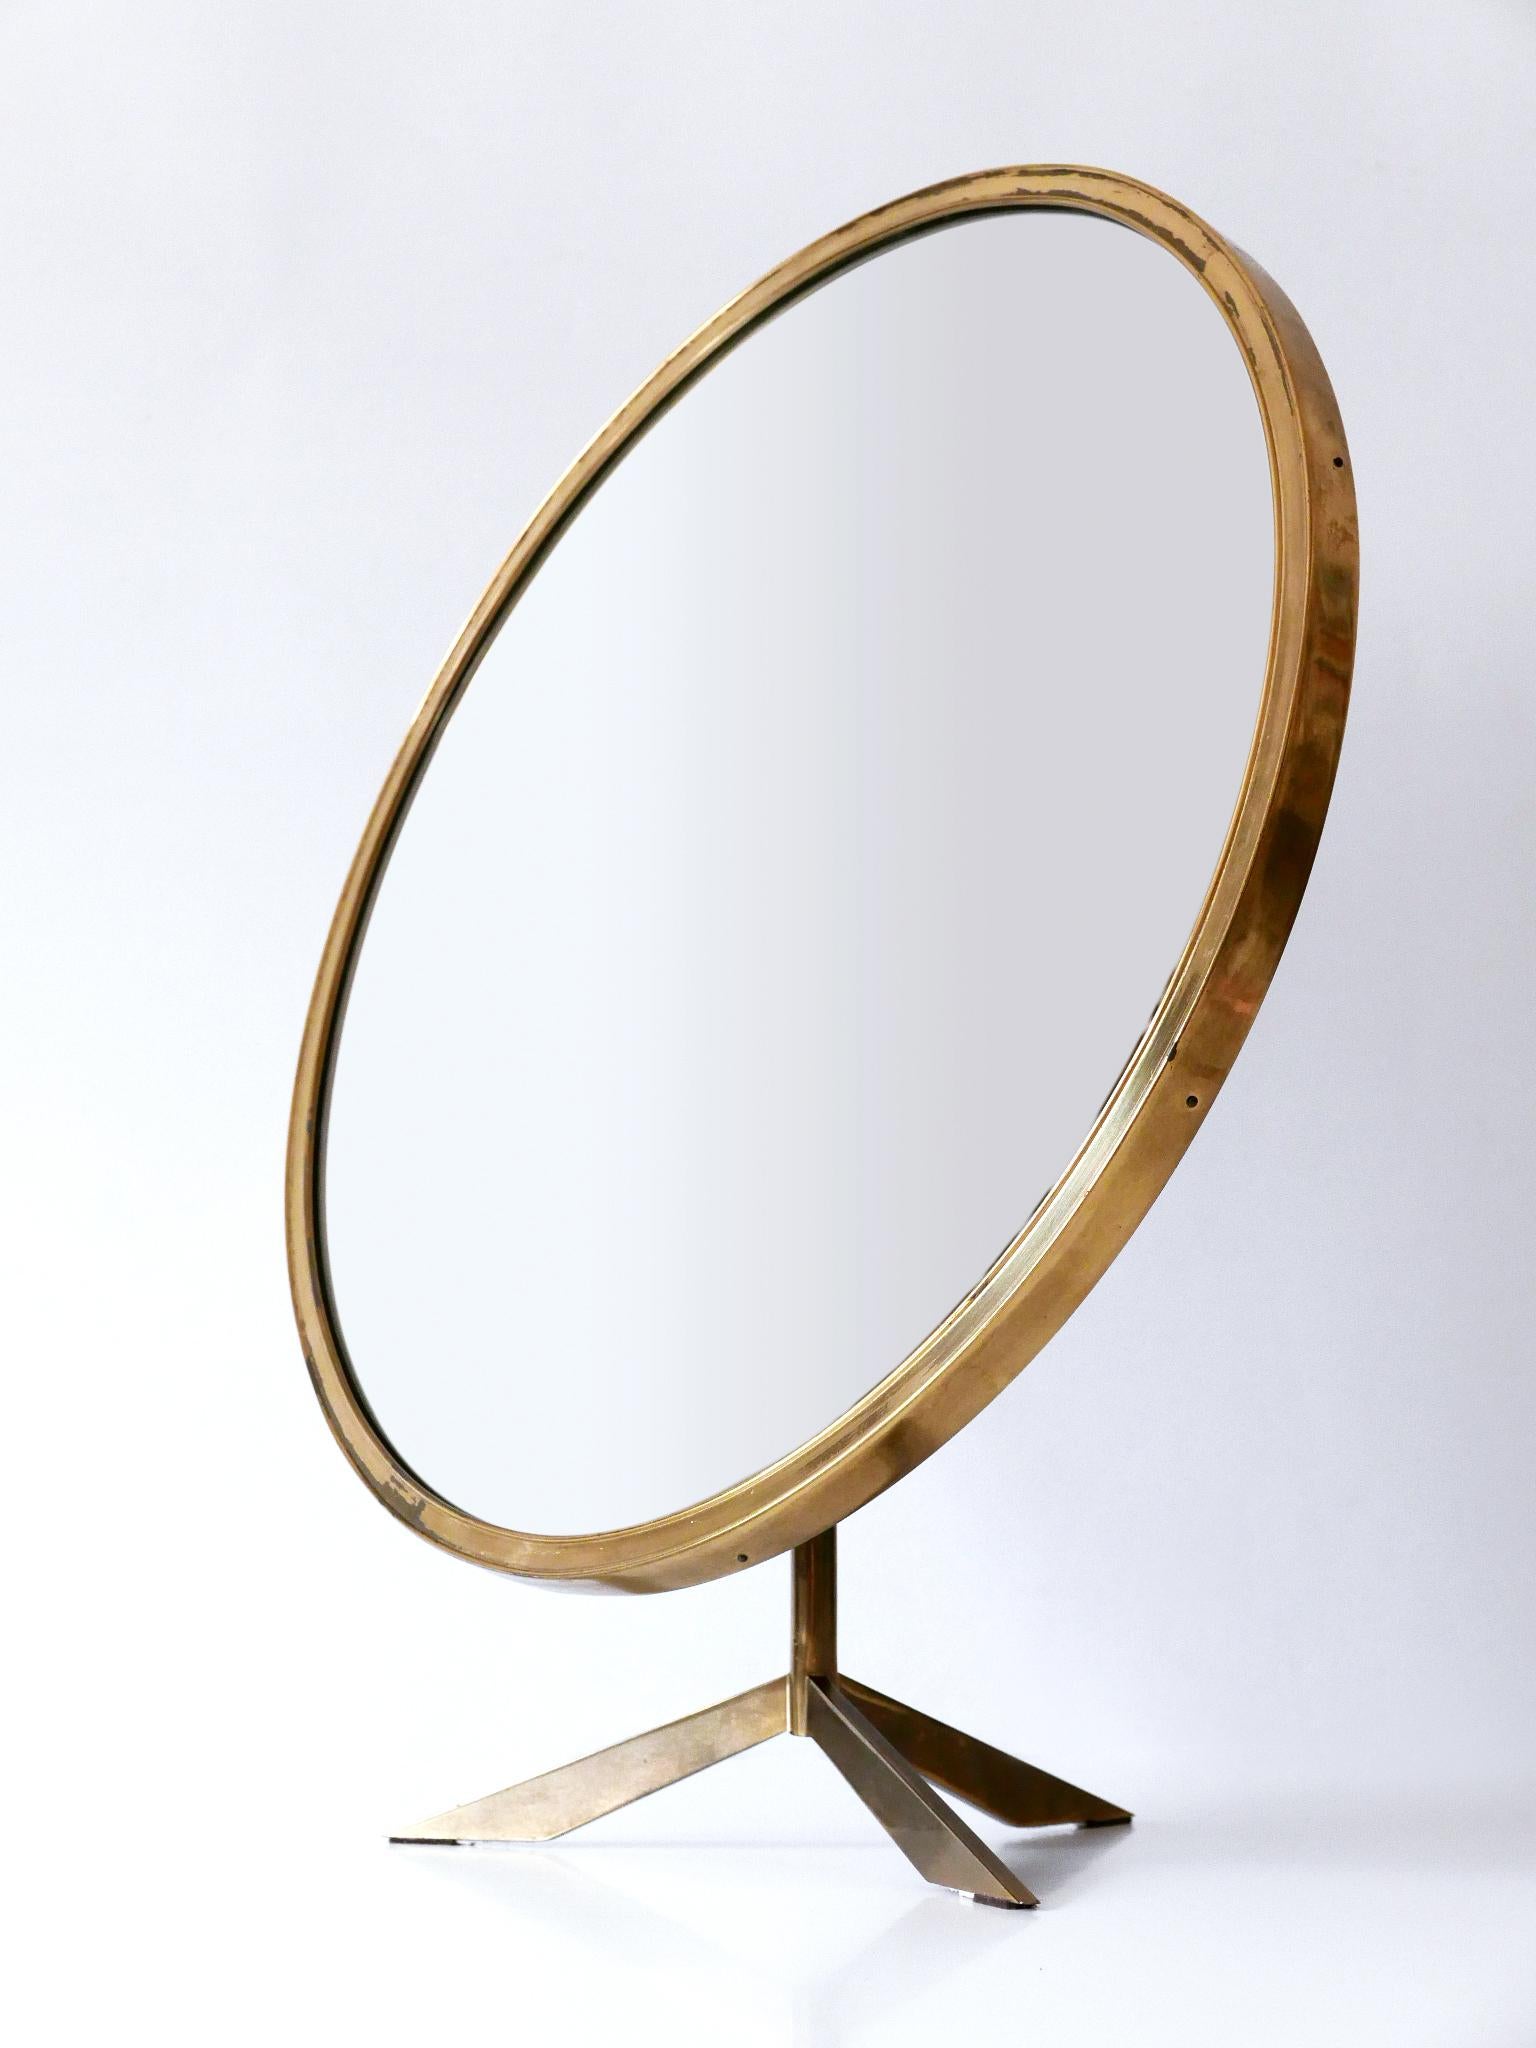 Elegant Mid-Century Modern Wall or Vanity Mirror by Zierform Germany 1950s For Sale 5